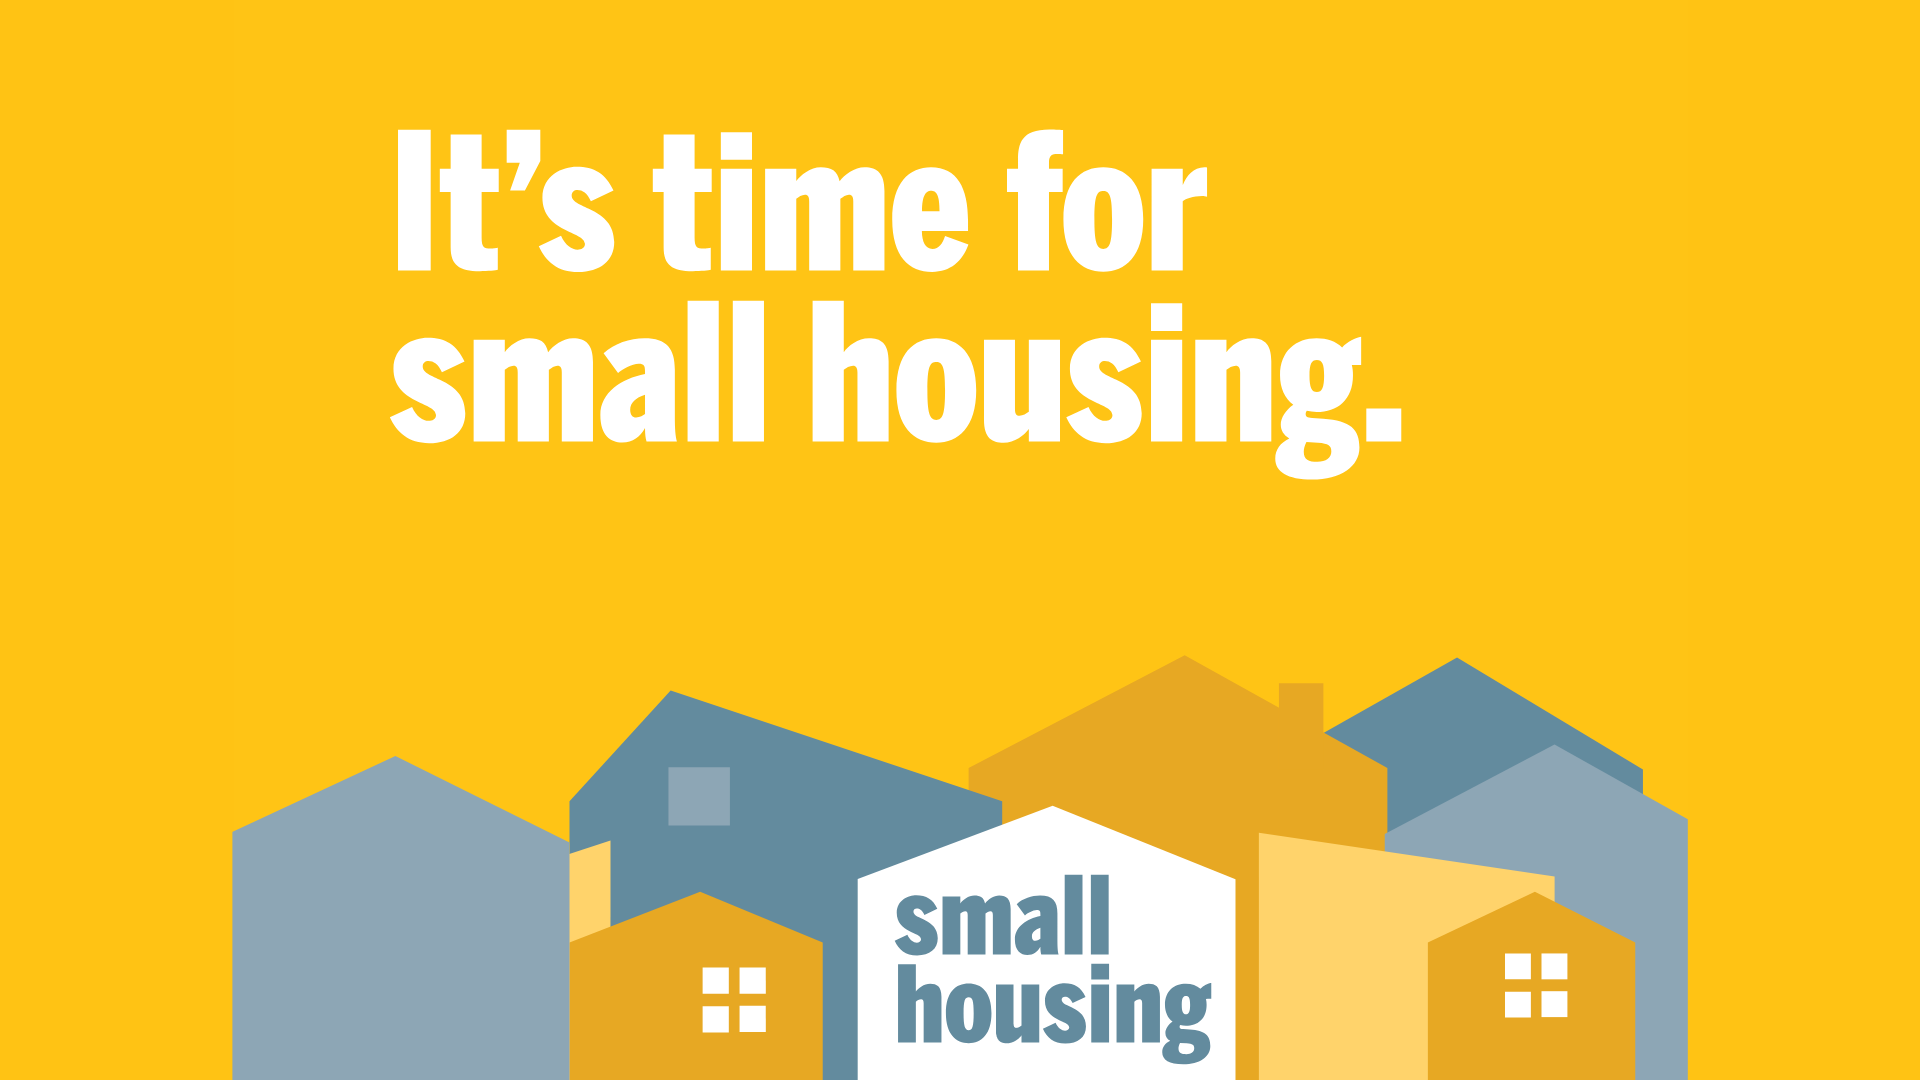 It's time for small housing text with houses in different shades of dark grey, blue, and yellow with the small housing logo with a house